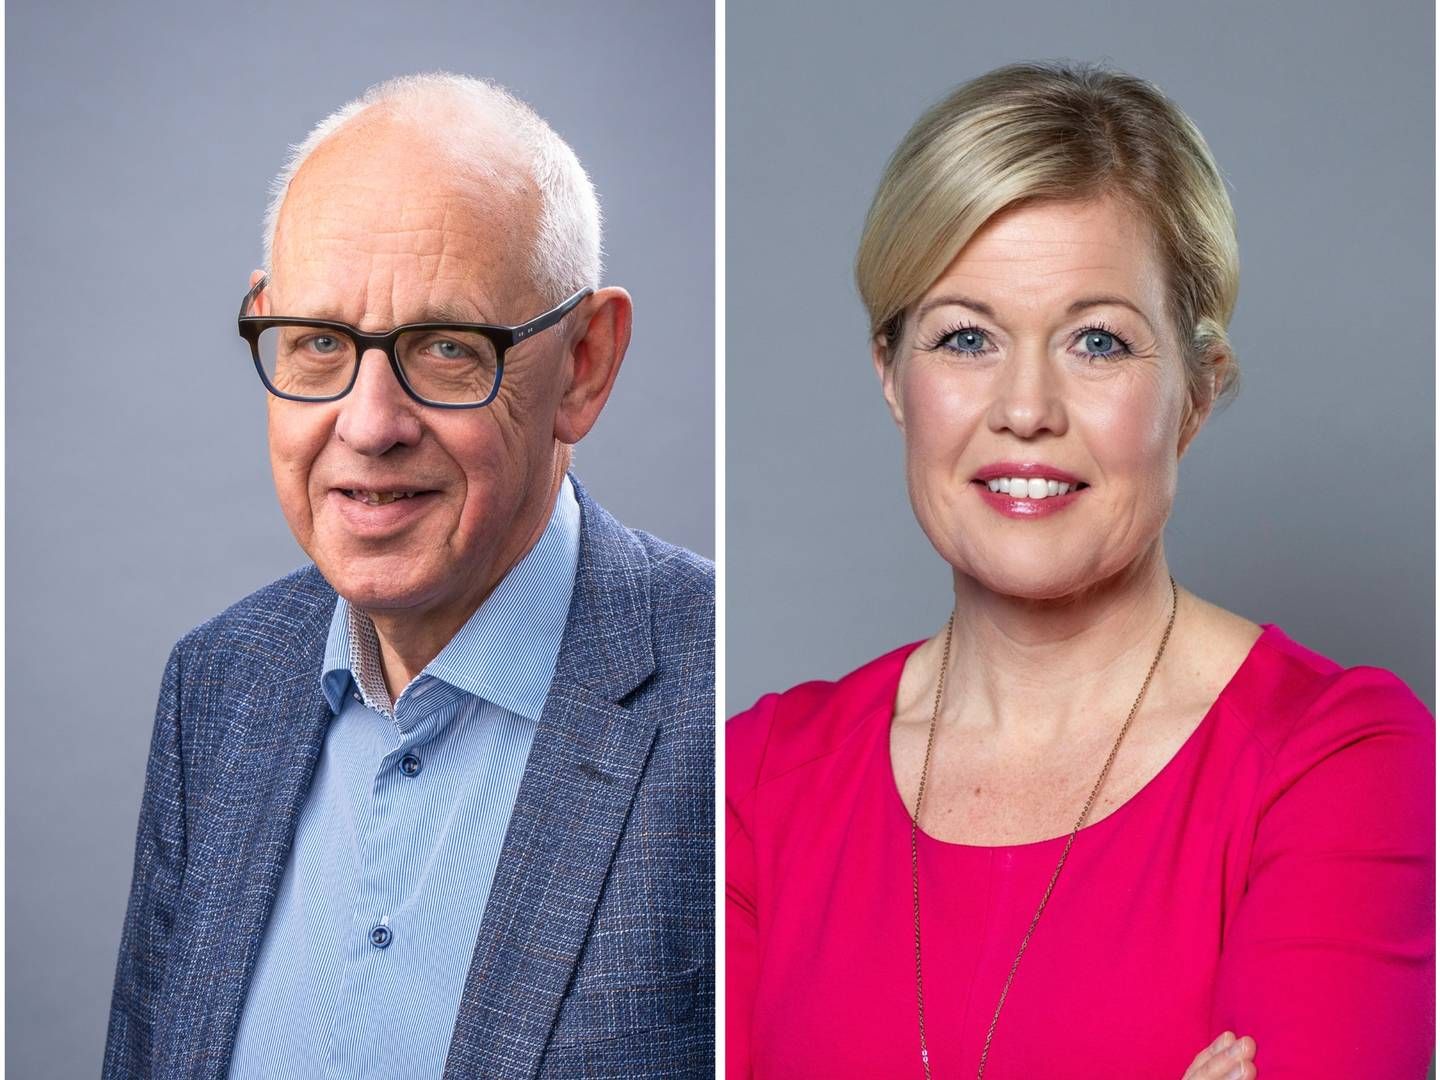 FTN chair Mats Sjöstrand and the director general of the Swedish Pensions Agency, Anna Pettersson Westerberg, have both reacted to criticism from the Swedish Investment Fund Association. | Photo: Fondtorgsnämnden / Pensionsmyndigheten / PR